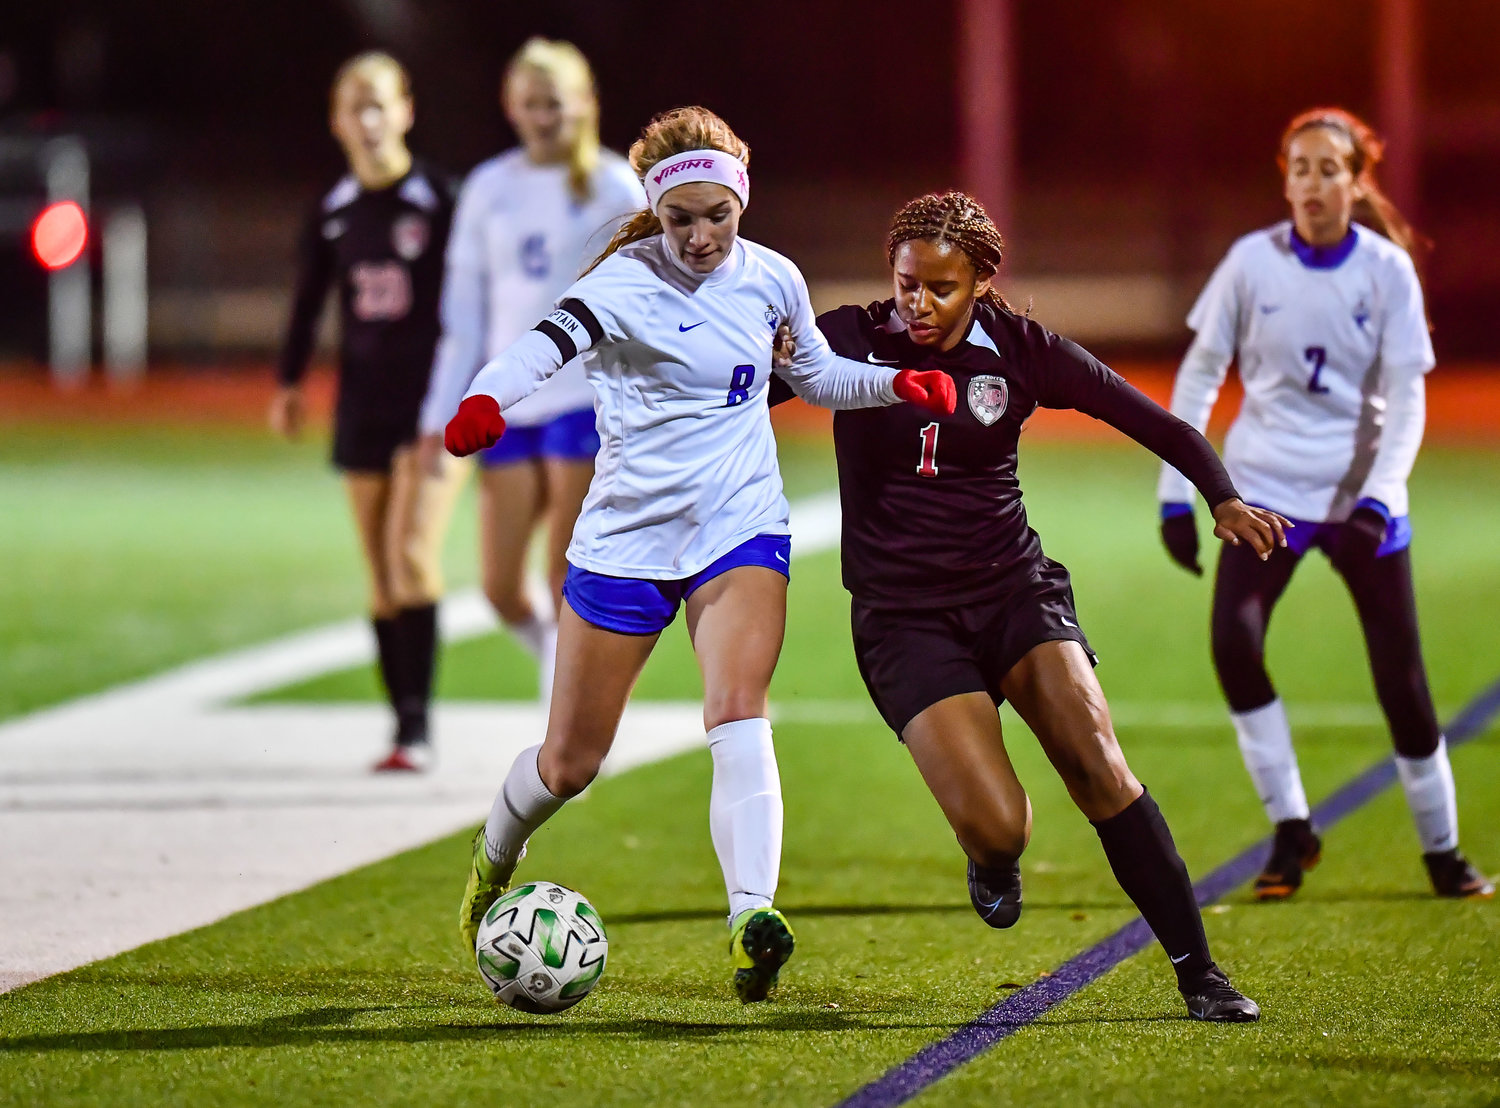 March 8, 2022:  Taylors Chauner Clausing and Katy's Olyvia Witham #1 scramble for the ball during the Katy vs Katy Taylor soccer match at KHS. (Photo by Mark Goodman / Katy Times)